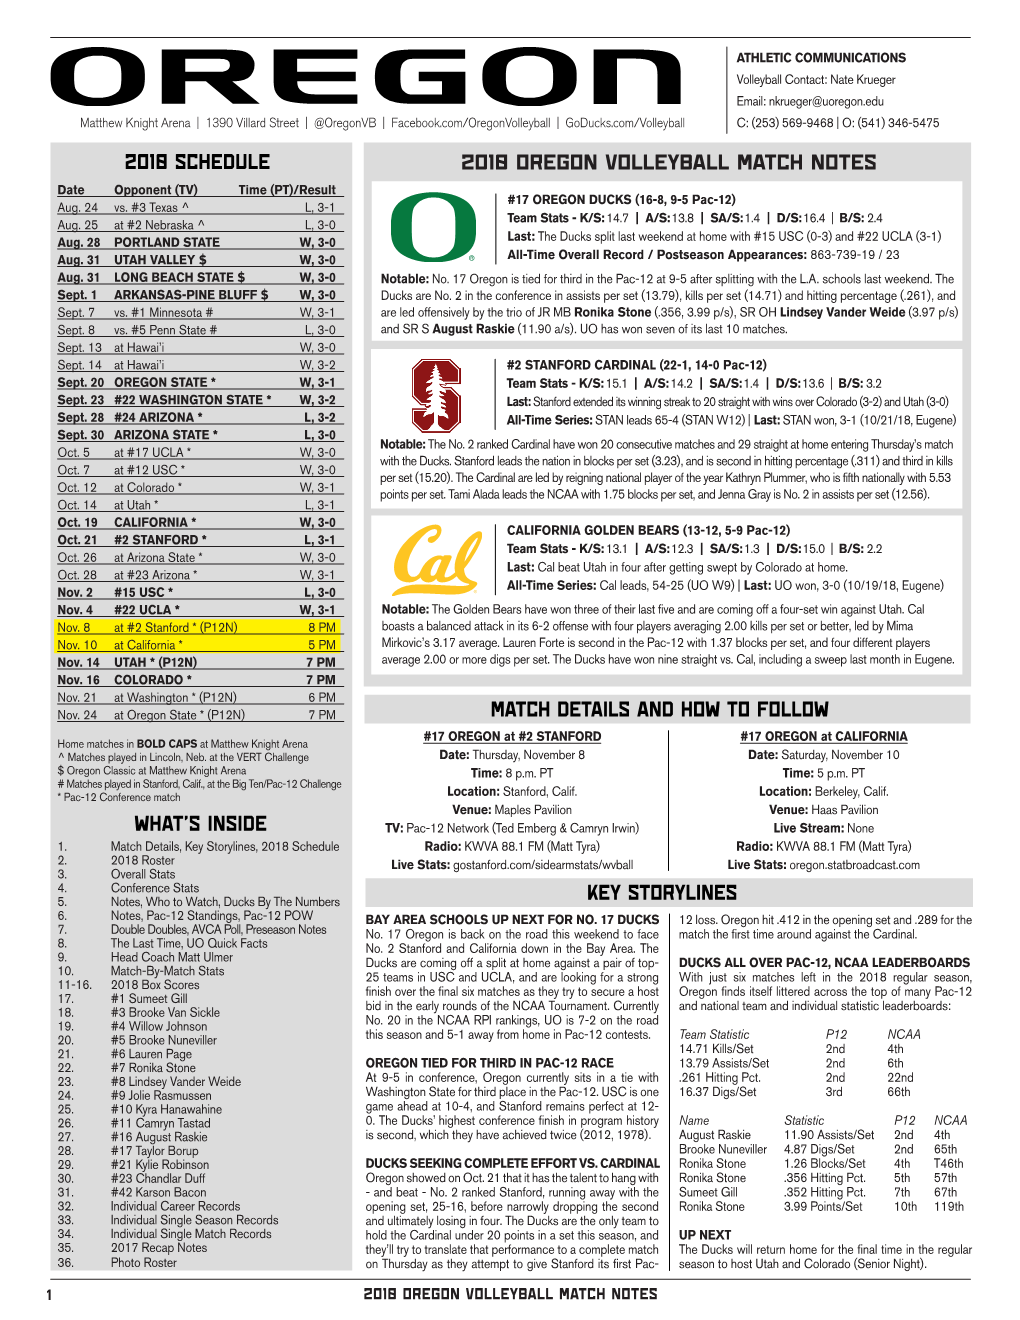 2018 OREGON VOLLEYBALL MATCH NOTES Date Opponent (TV) Time (PT)/Result #17 OREGON DUCKS (16-8, 9-5 Pac-12) Aug